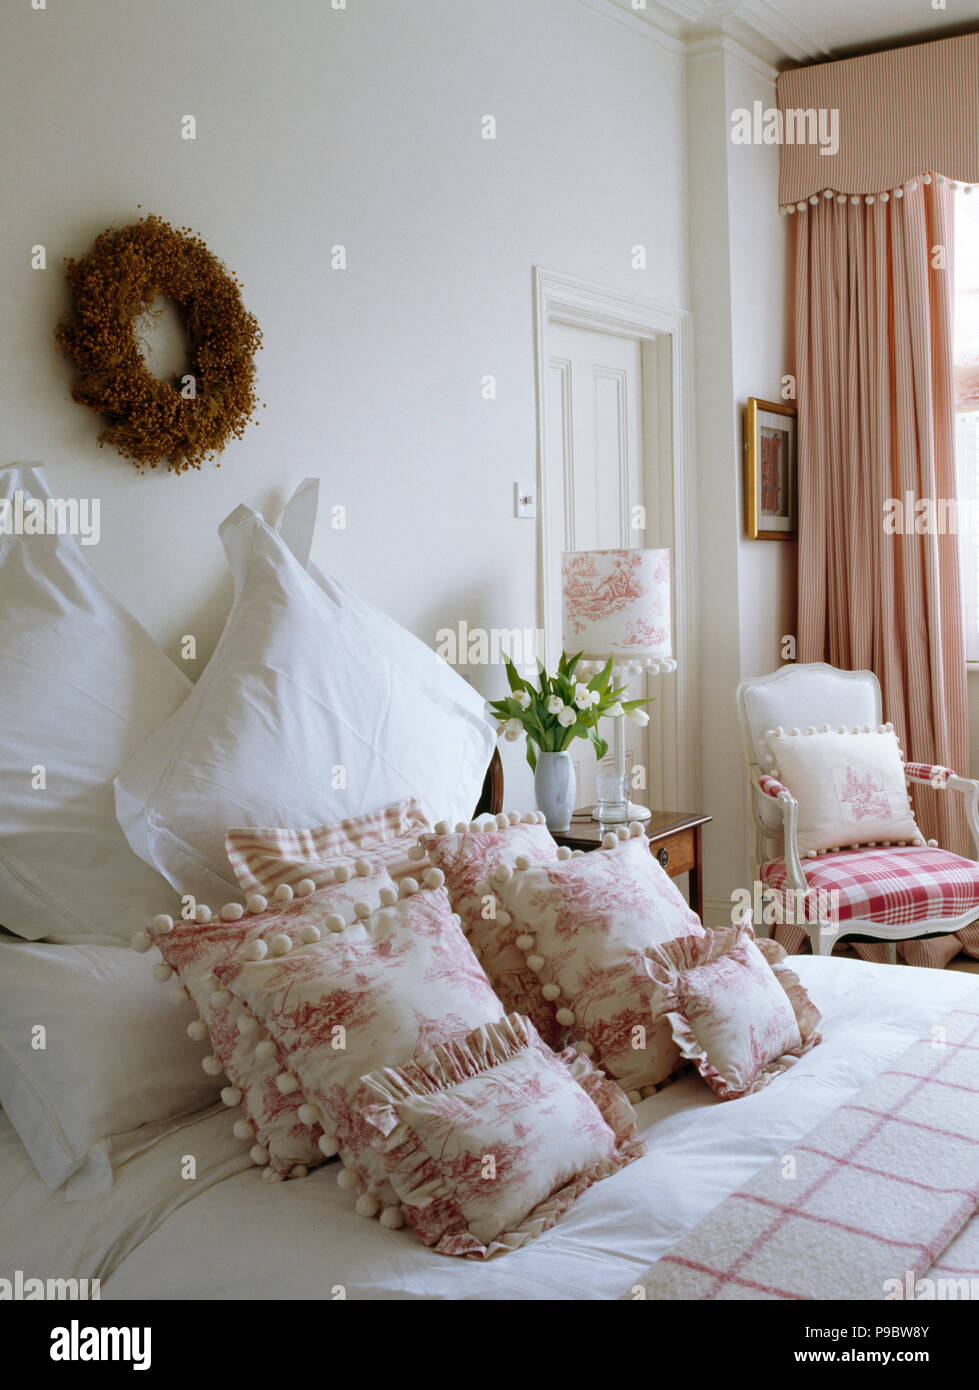 Twig wreath on wall above bed with pink Toile-de-Jouy cushions and white pillows Stock Photo